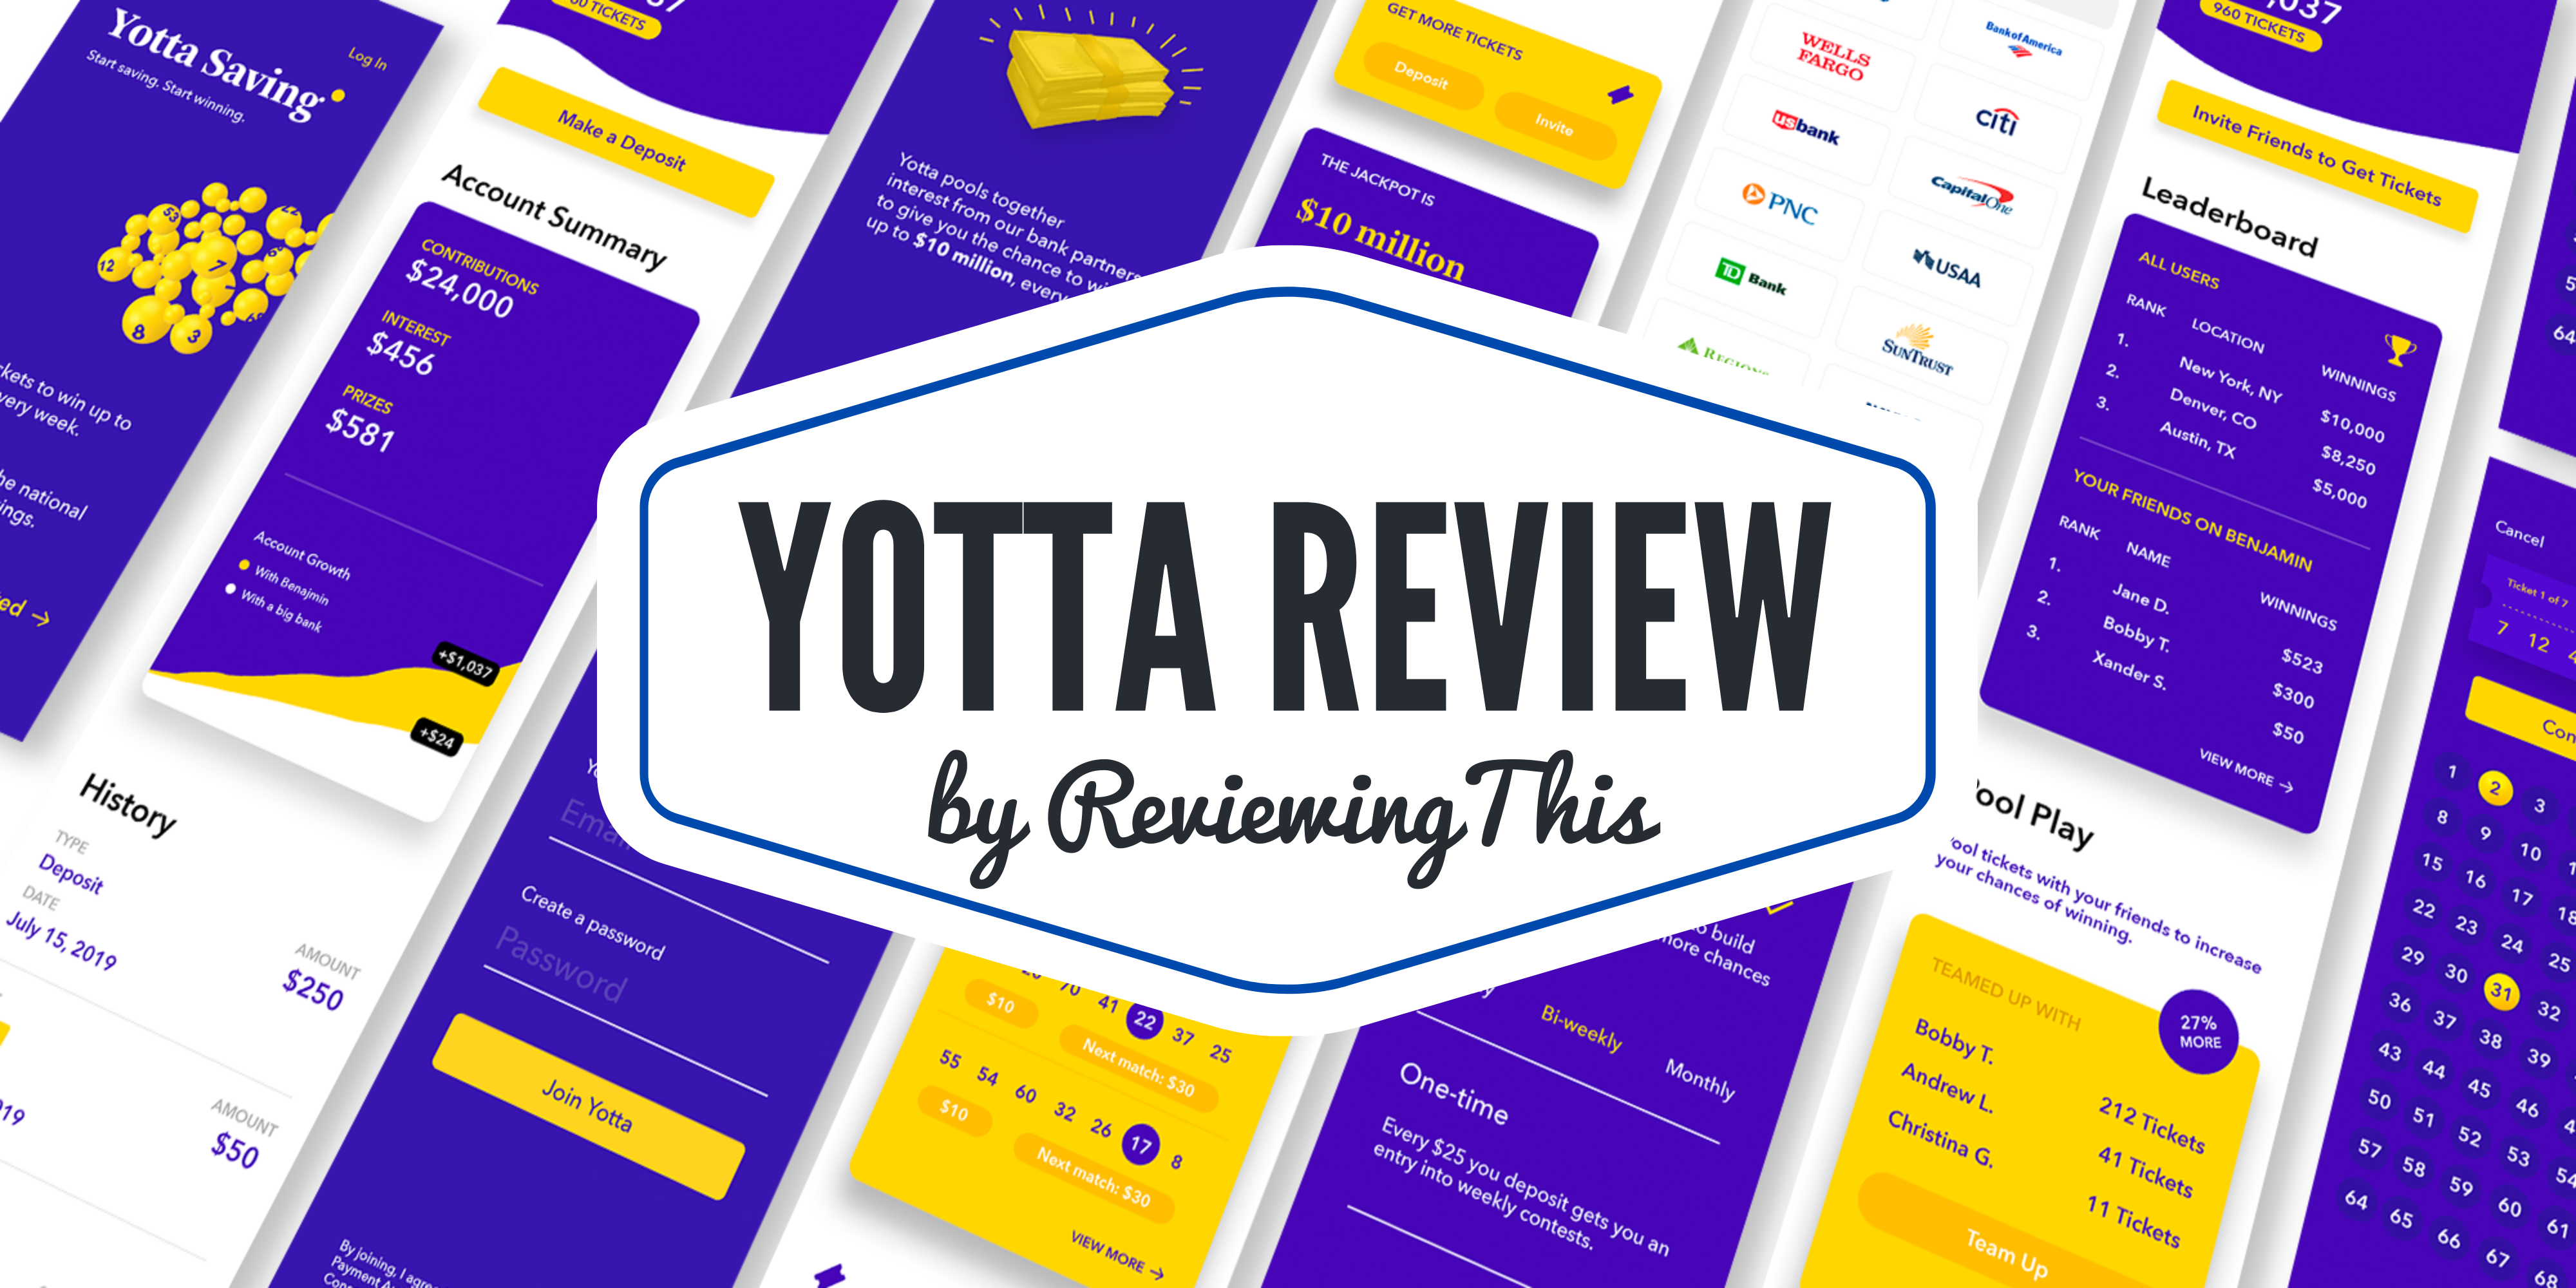 Yotta Savings Review: I deposited $10,000 to try them! 1